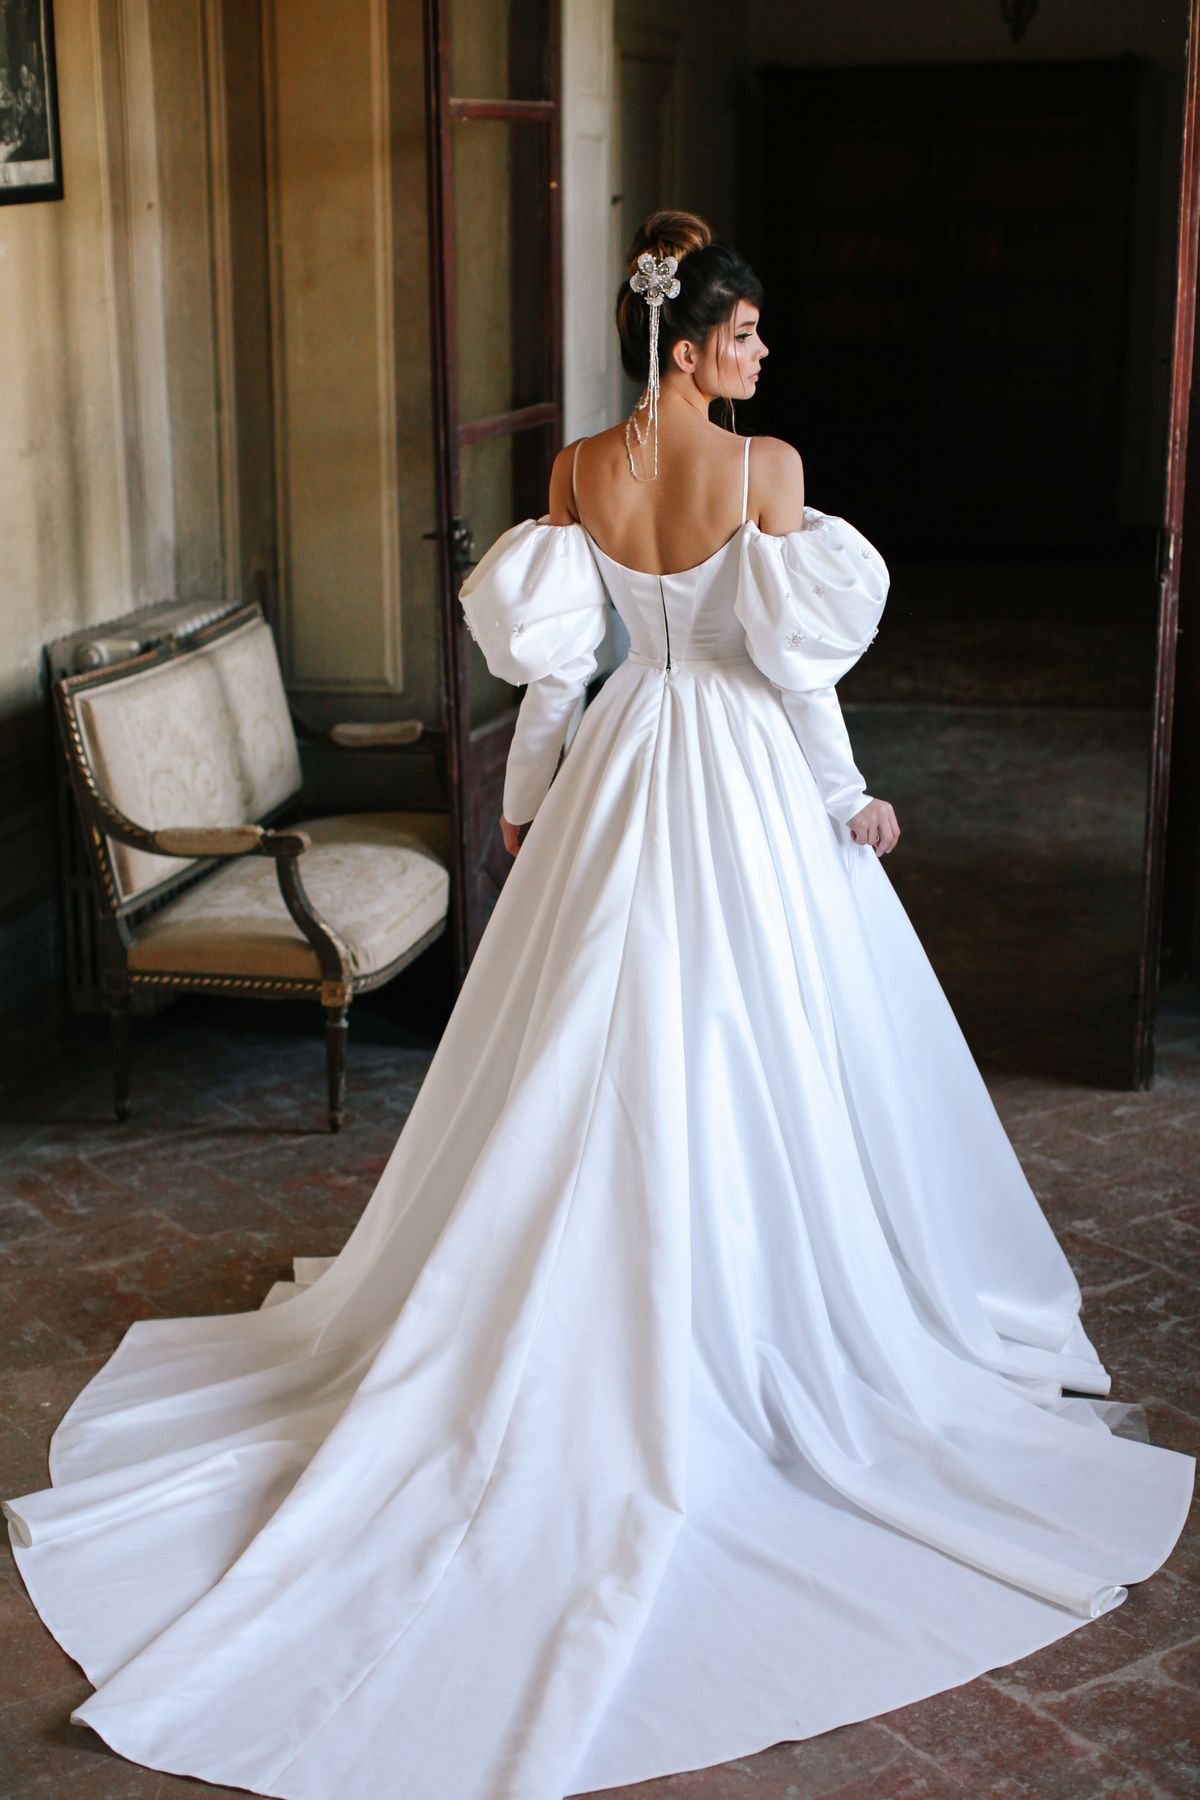 Itan wedding dress by rara avis with white satin fabric and off shoulders long sleeves at Dell'Amore Bridal, Auckland, NZ. 7